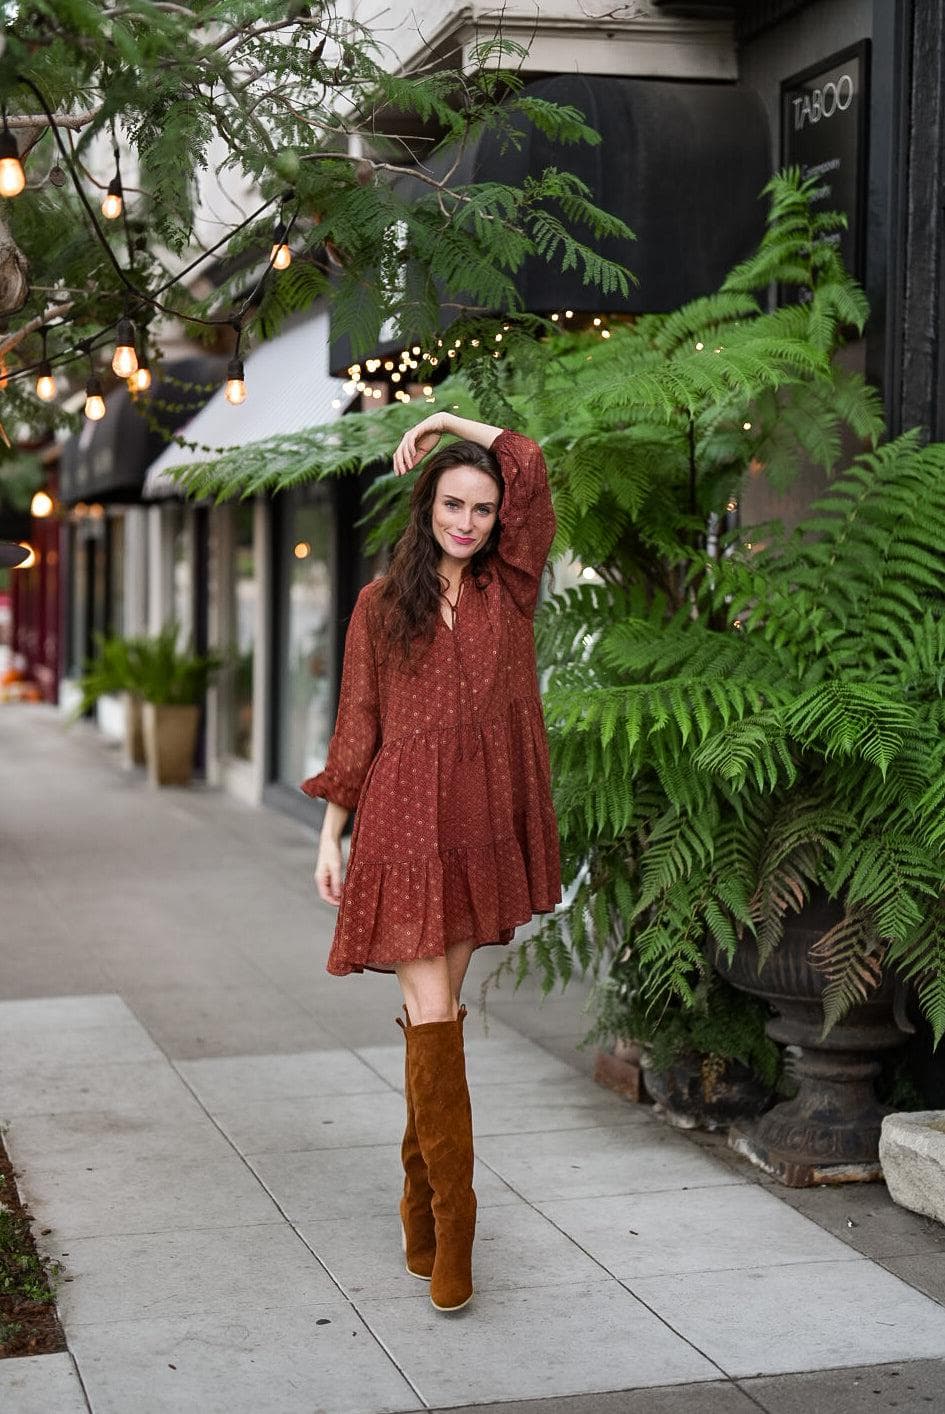 Long Sleeve Mini Dress by Molly Bracken Dresses Scout and Poppy Fashion Boutique